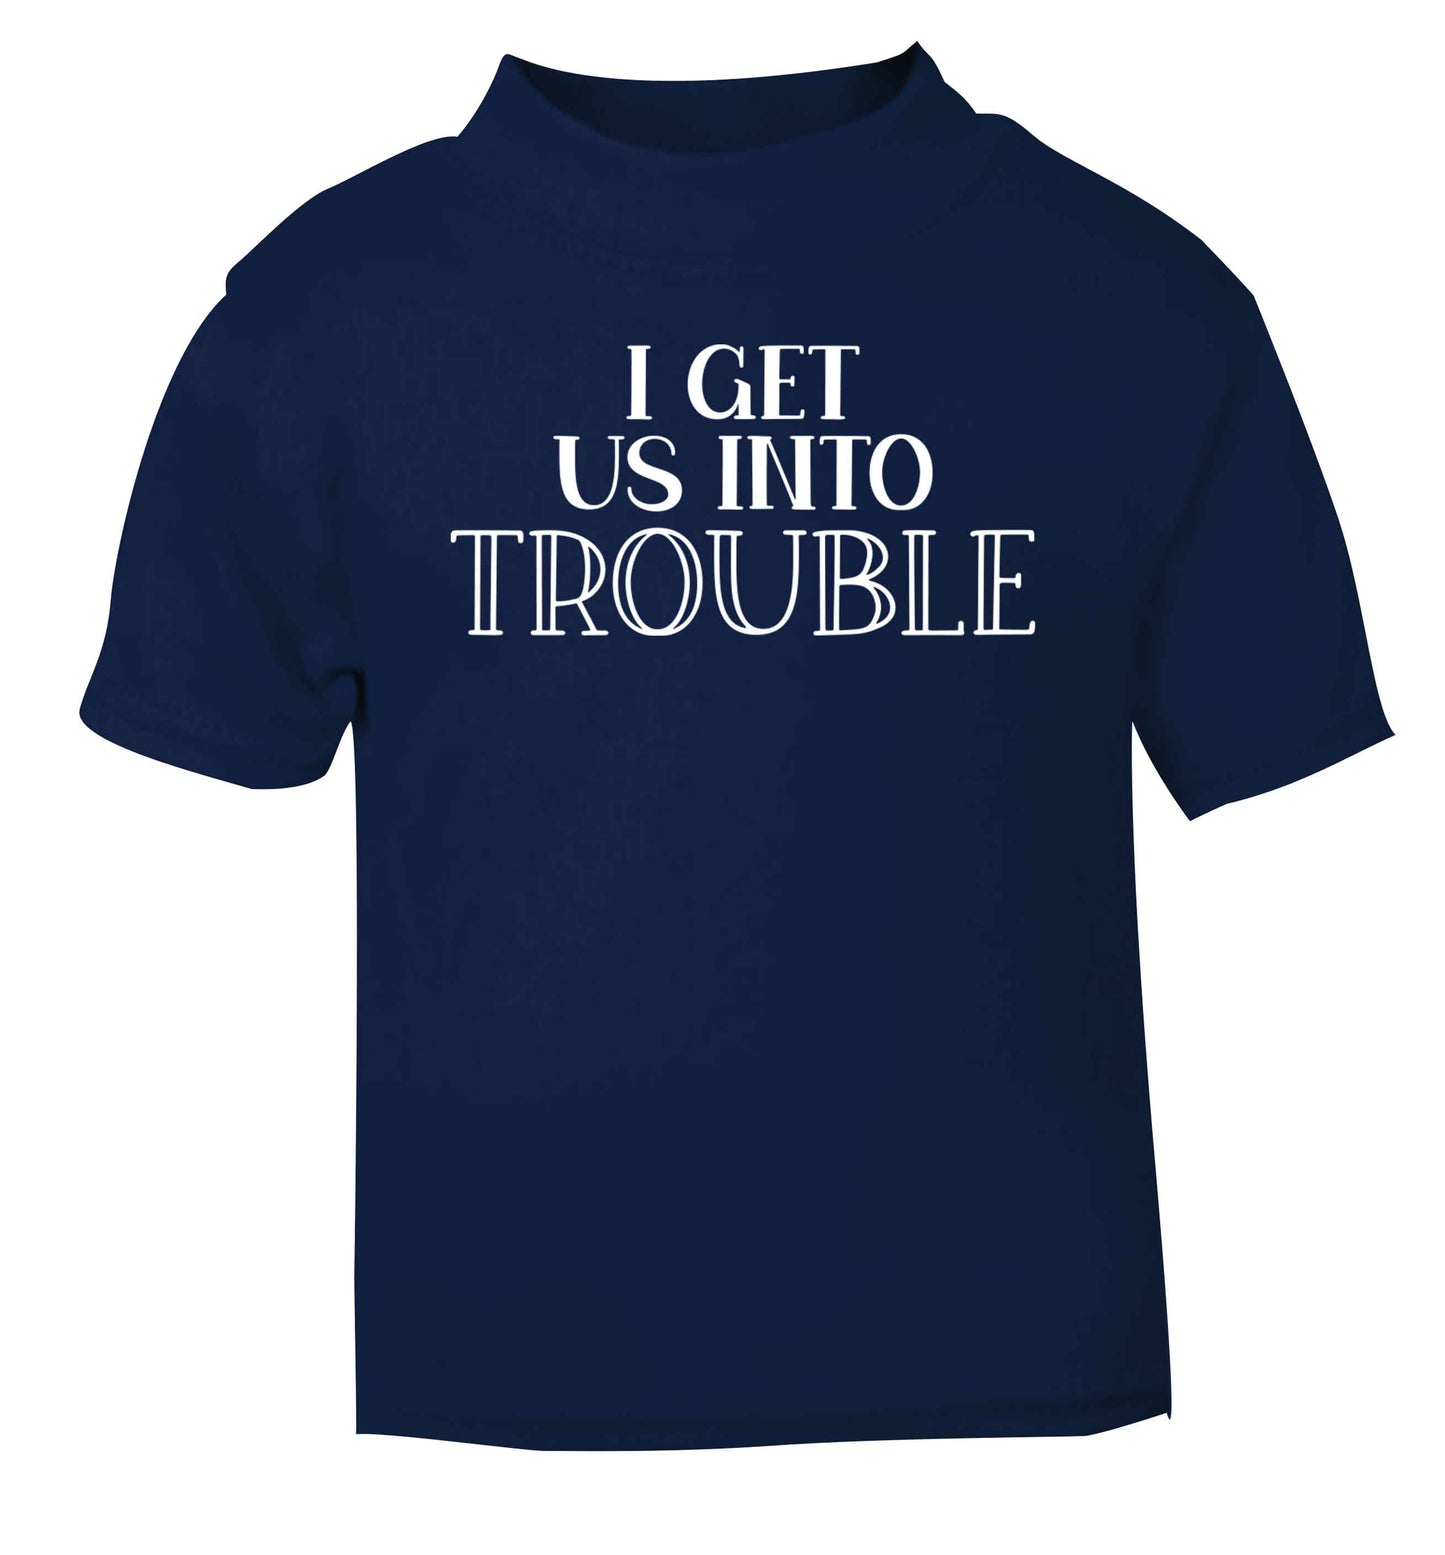 I get us into trouble navy baby toddler Tshirt 2 Years